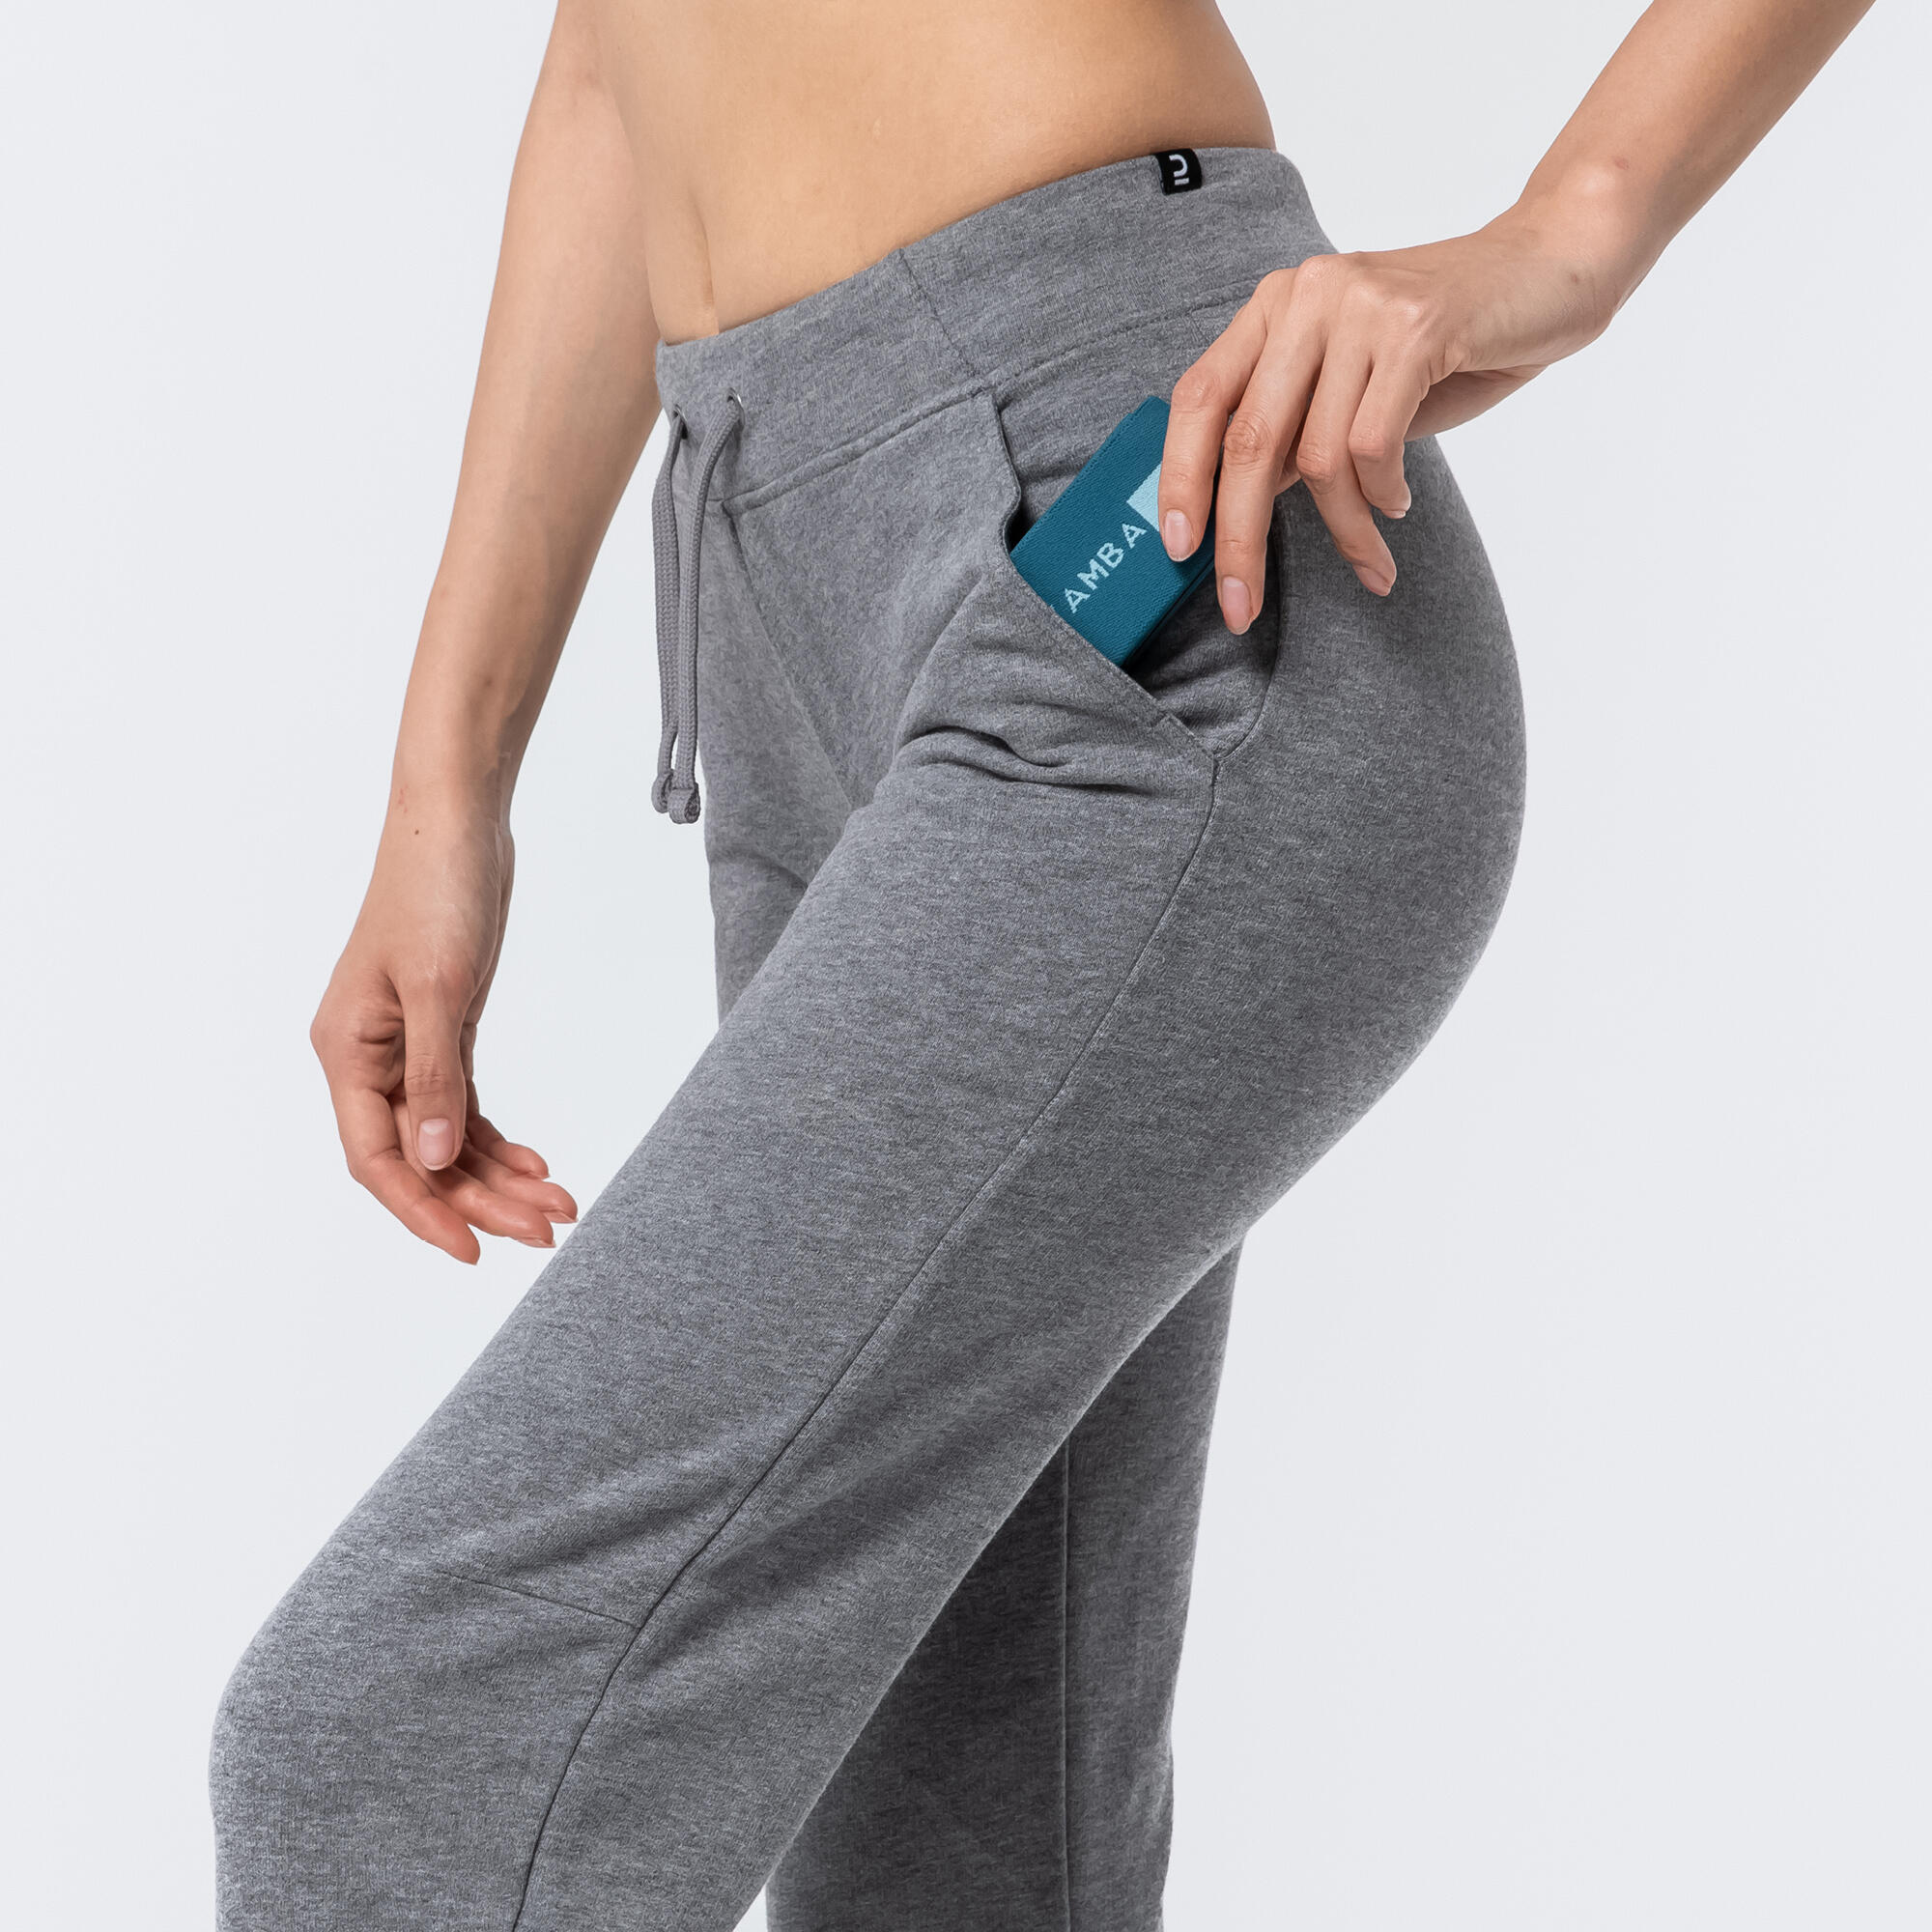 Women's Straight Cut Cotton Jogging Fitness Bottoms With Pocket 500 - Grey 4/5